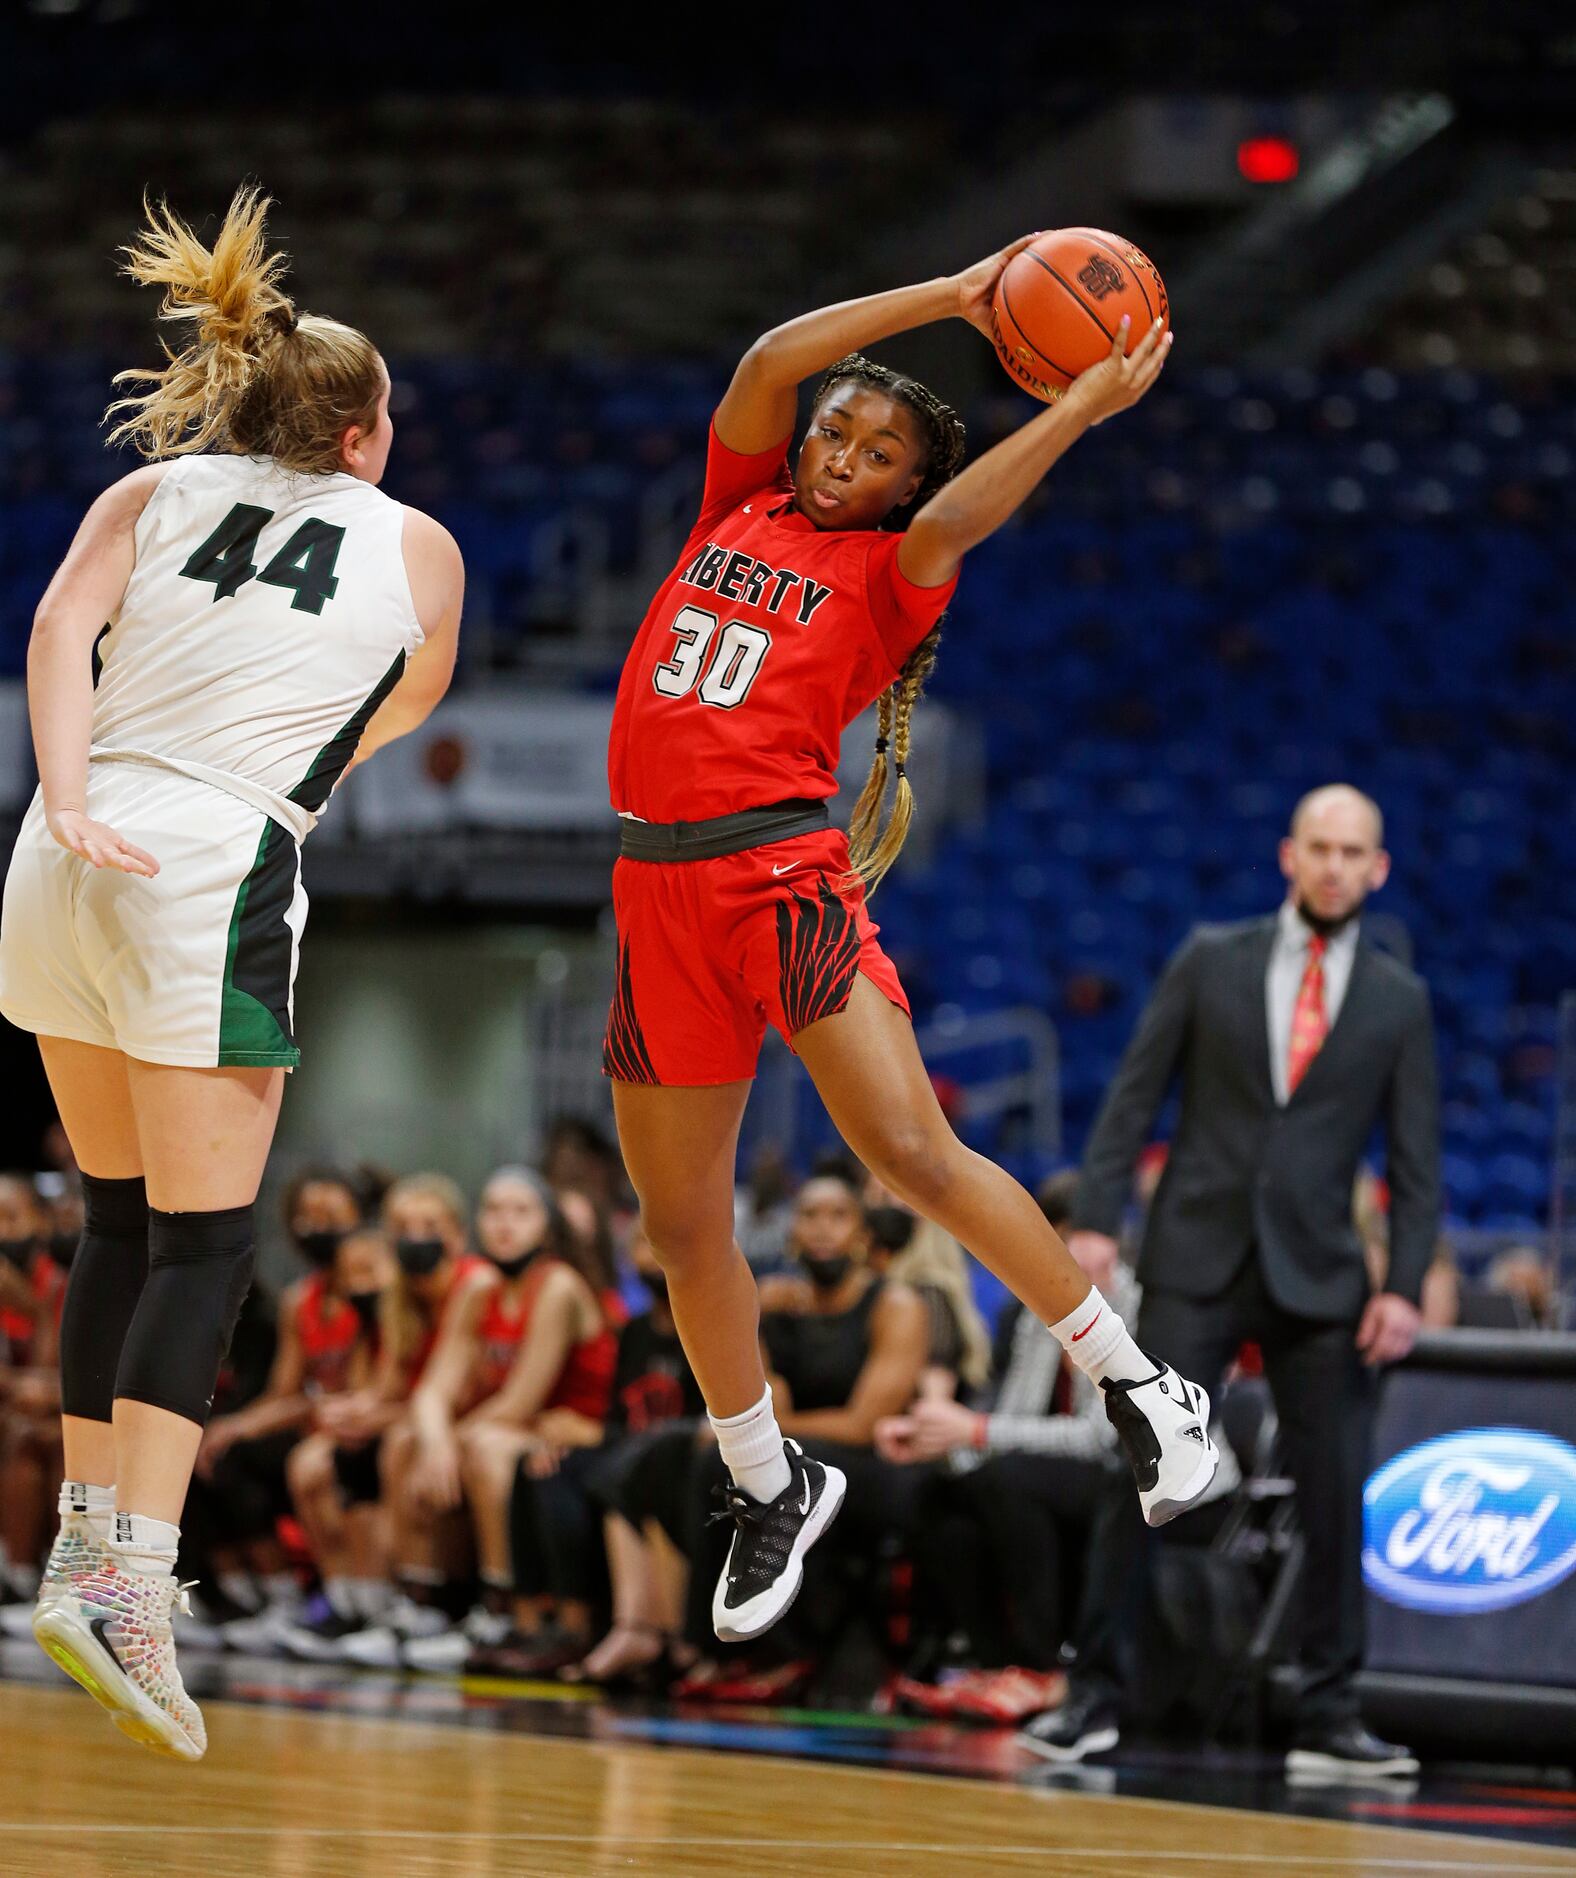 Frisco Liberty Jazzy Owens-Barnett #30 grabs a high pass in front of Cedar Park Shelby Hayes...